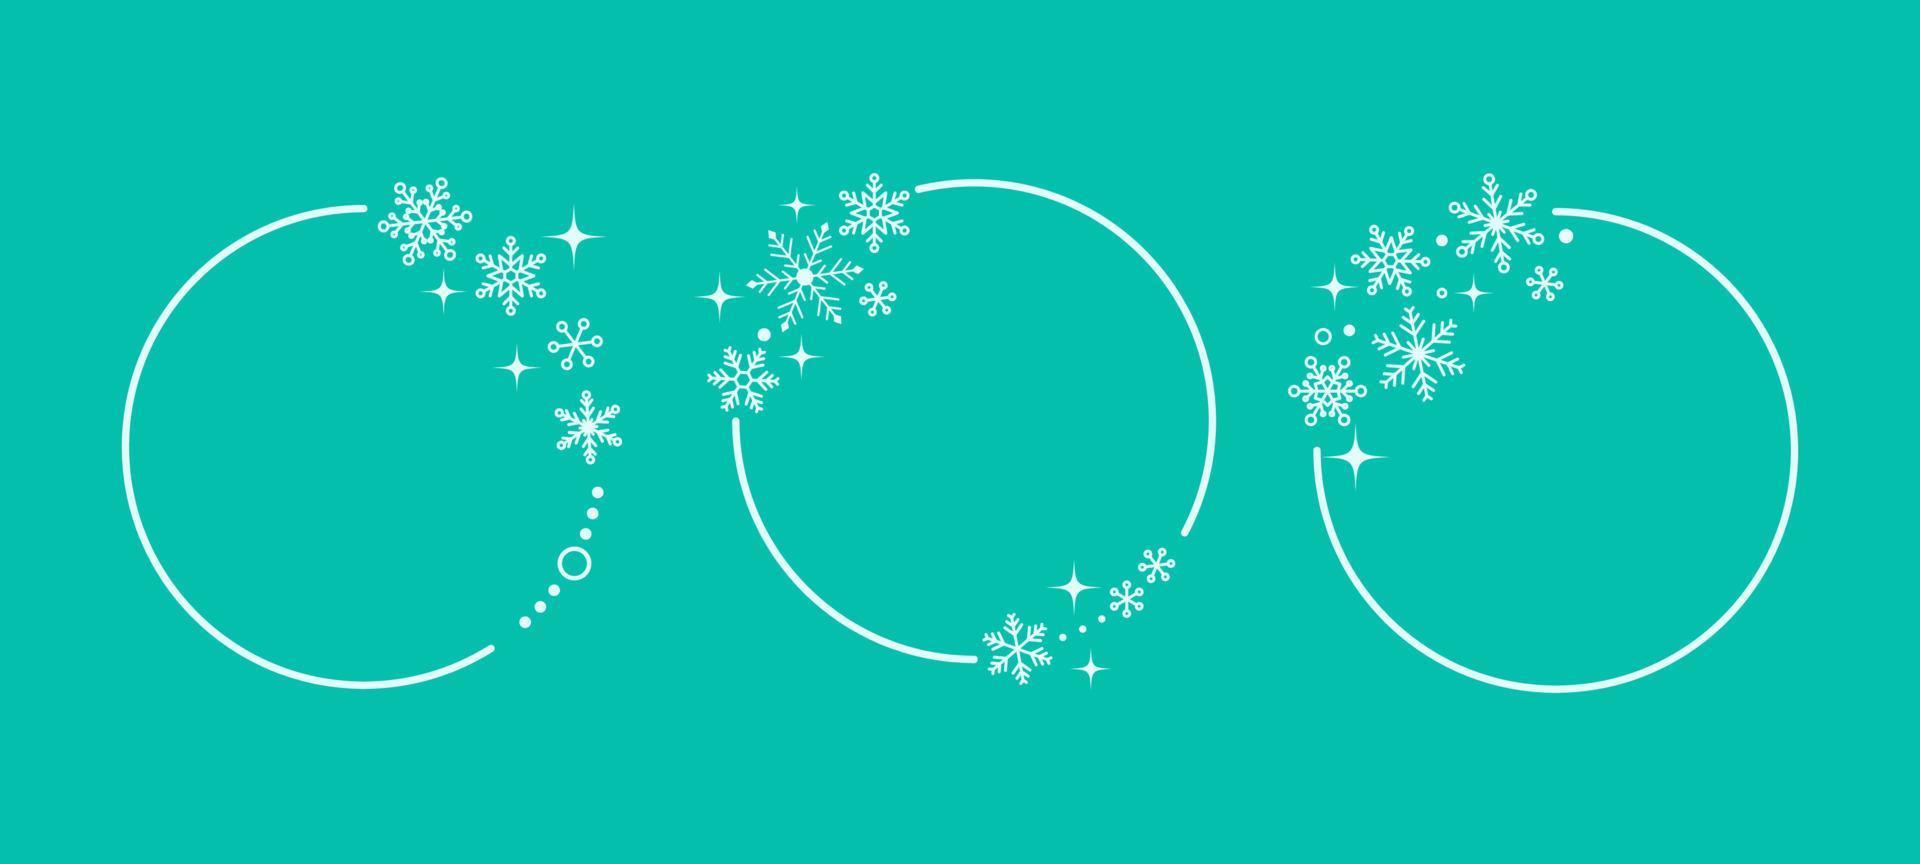 Circle frame with snowflakes decoration vector